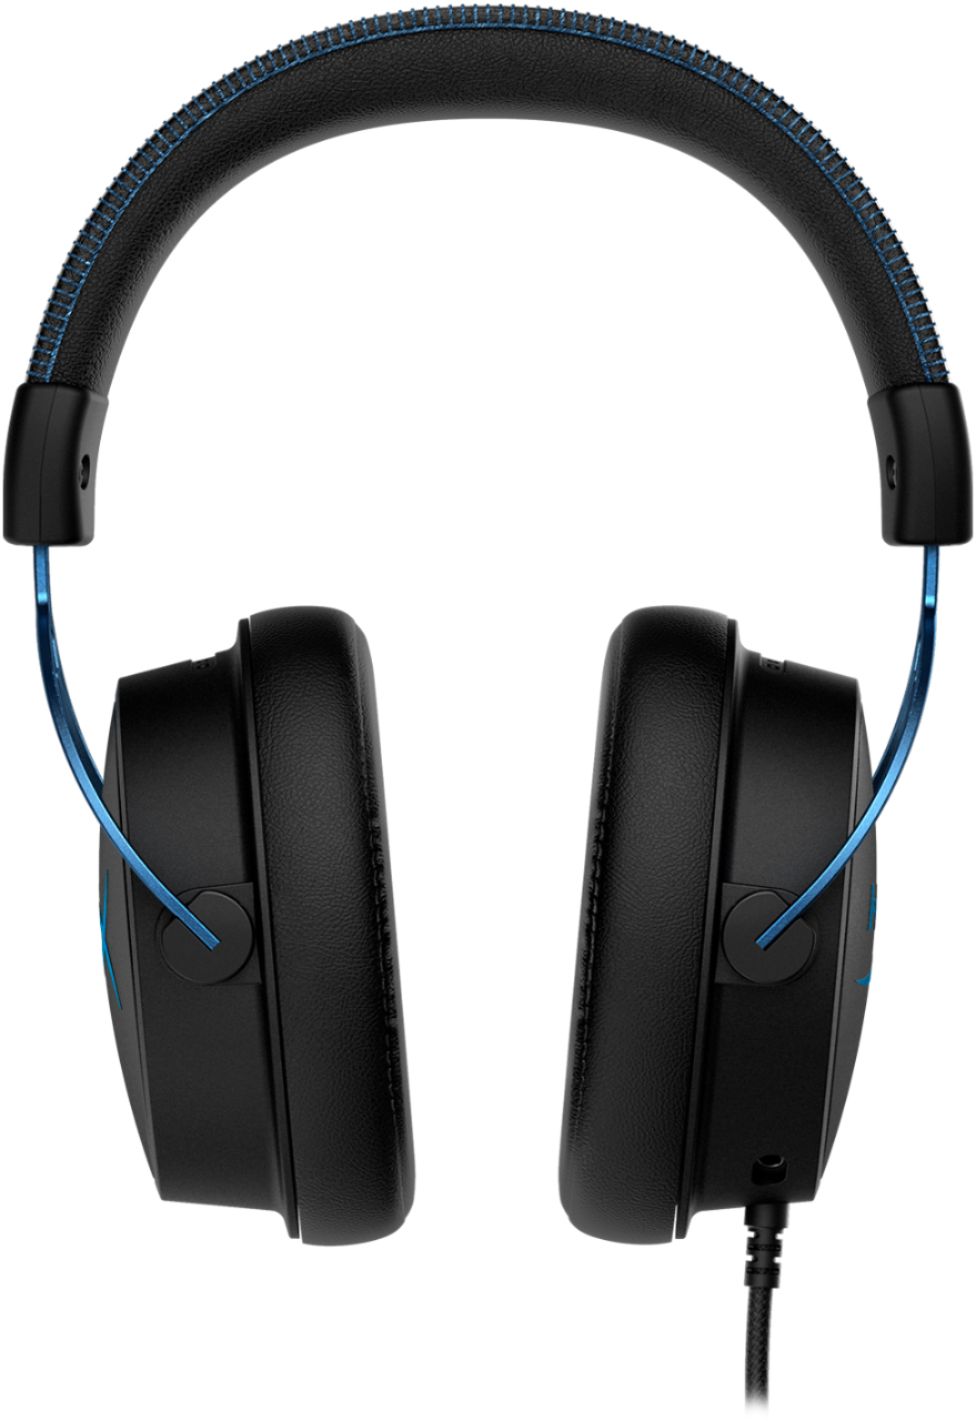 HyperX Cloud Alpha S Gaming Headset Review: Airy Fit, Virtual Surround  Surround, New Blackout Edition